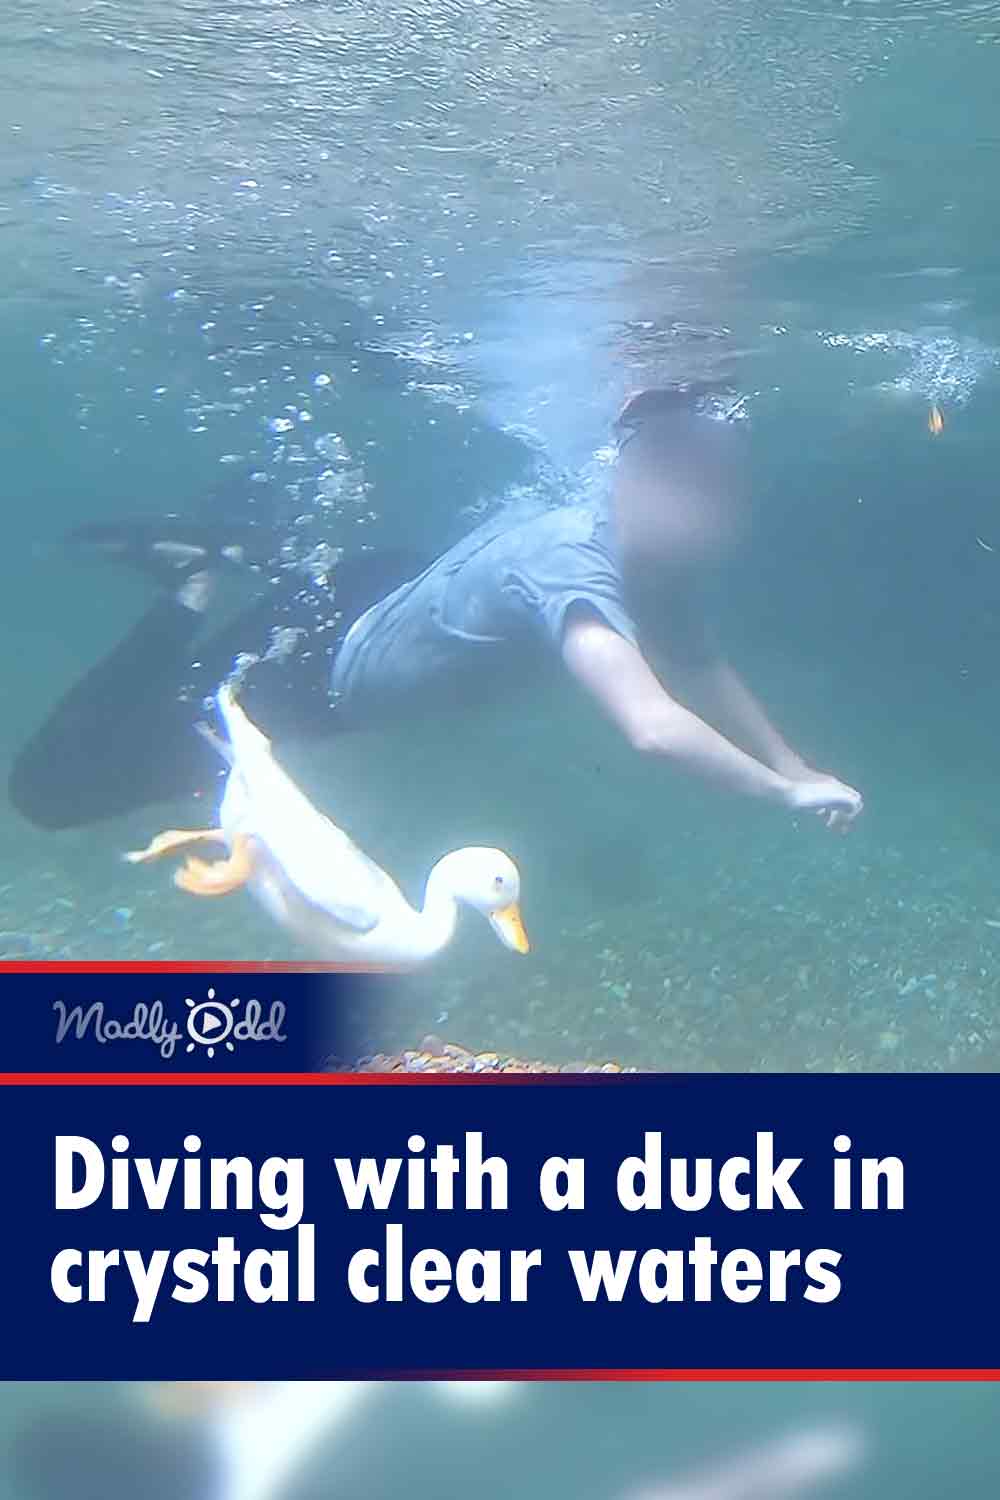 Diving with a duck in crystal clear waters